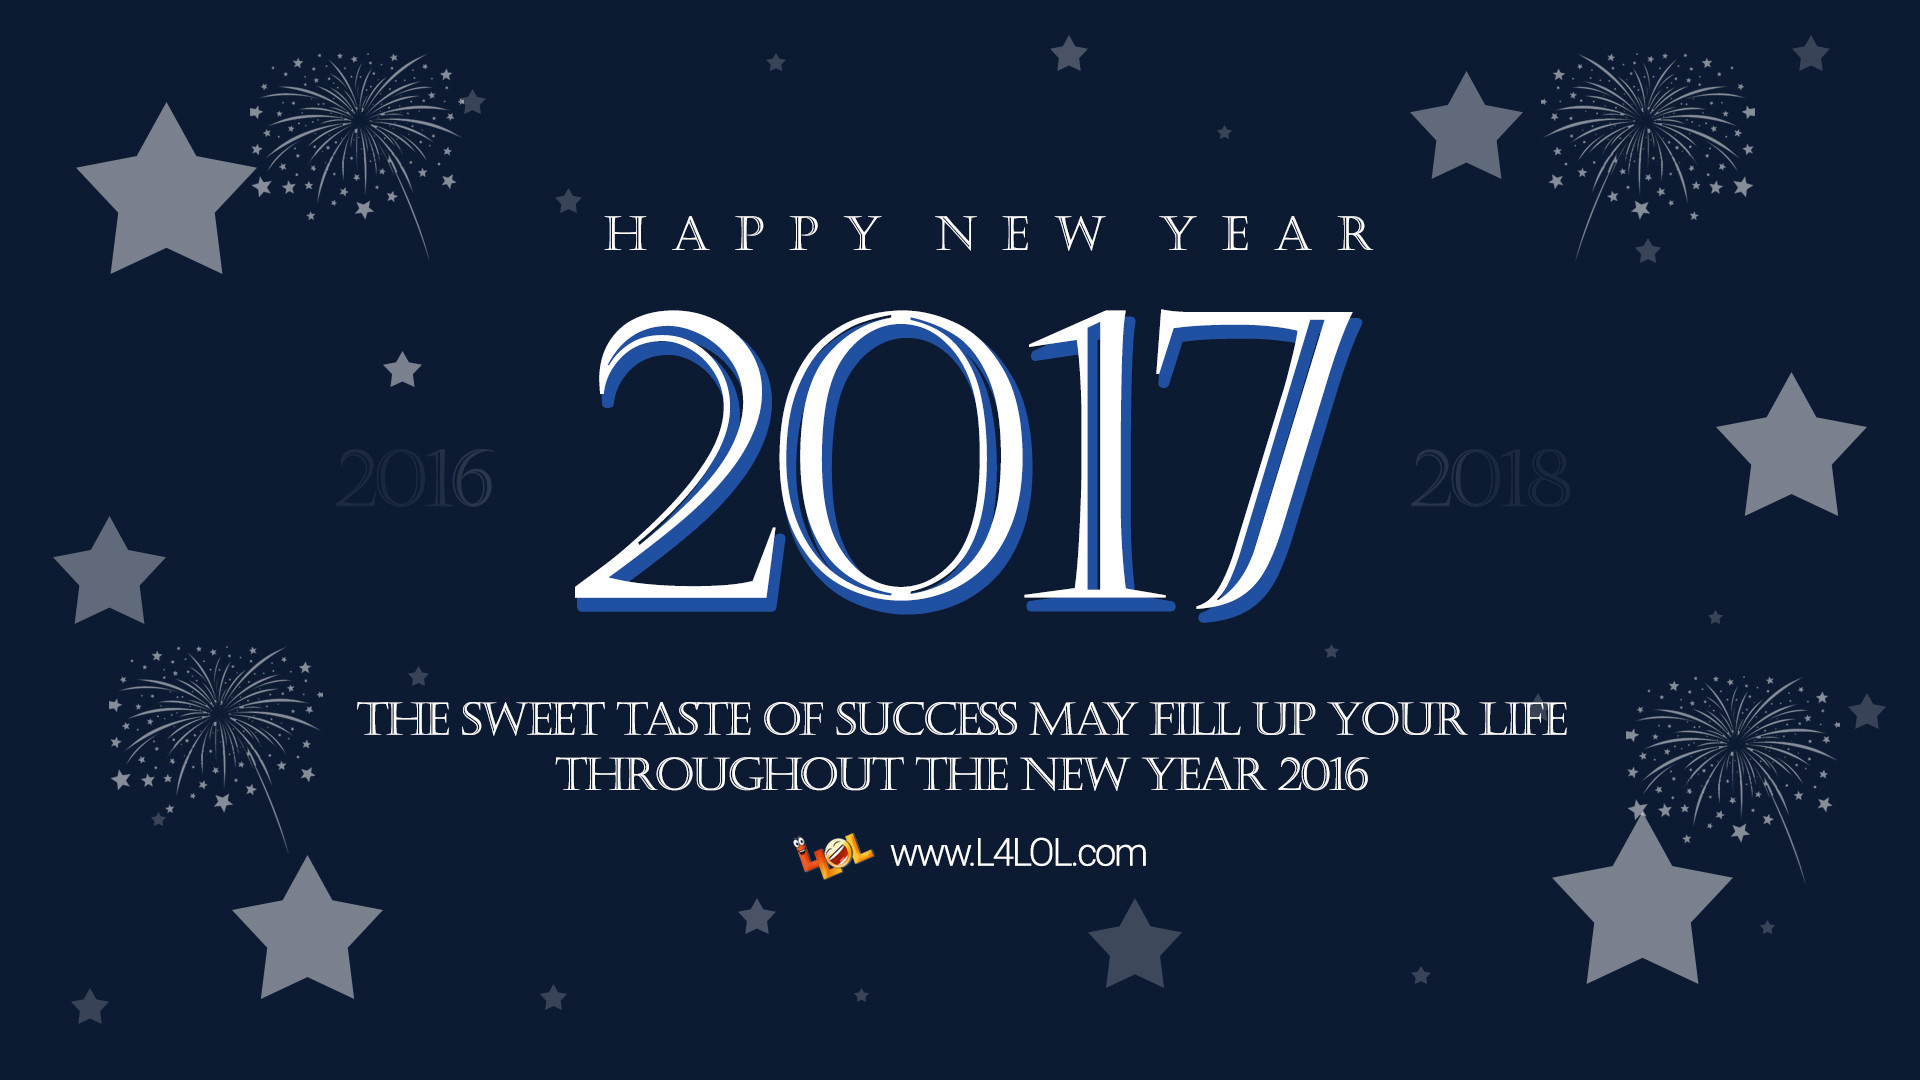 1920x1080 Happy New Year 2017 Wallpapers - http://www.welcomehappynewyear2016.com/